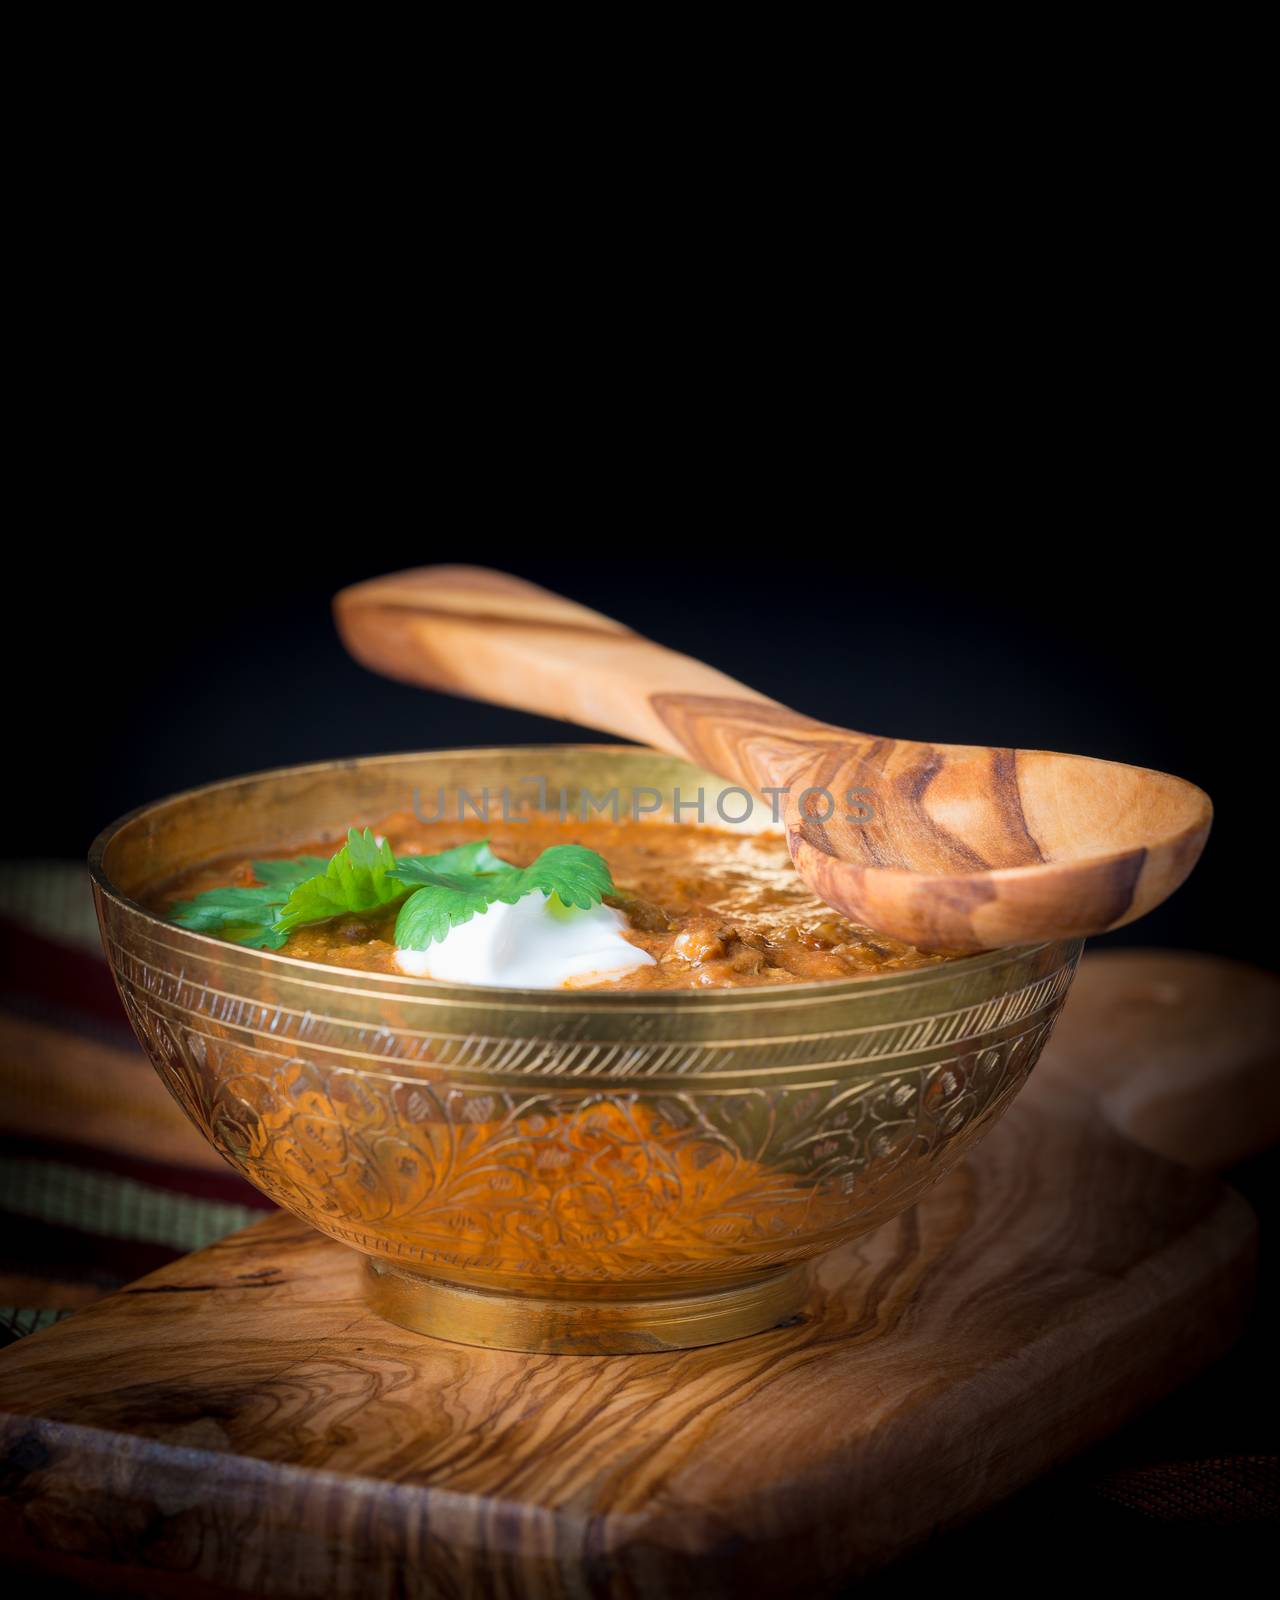 Daal Bowl Portrait by billberryphotography